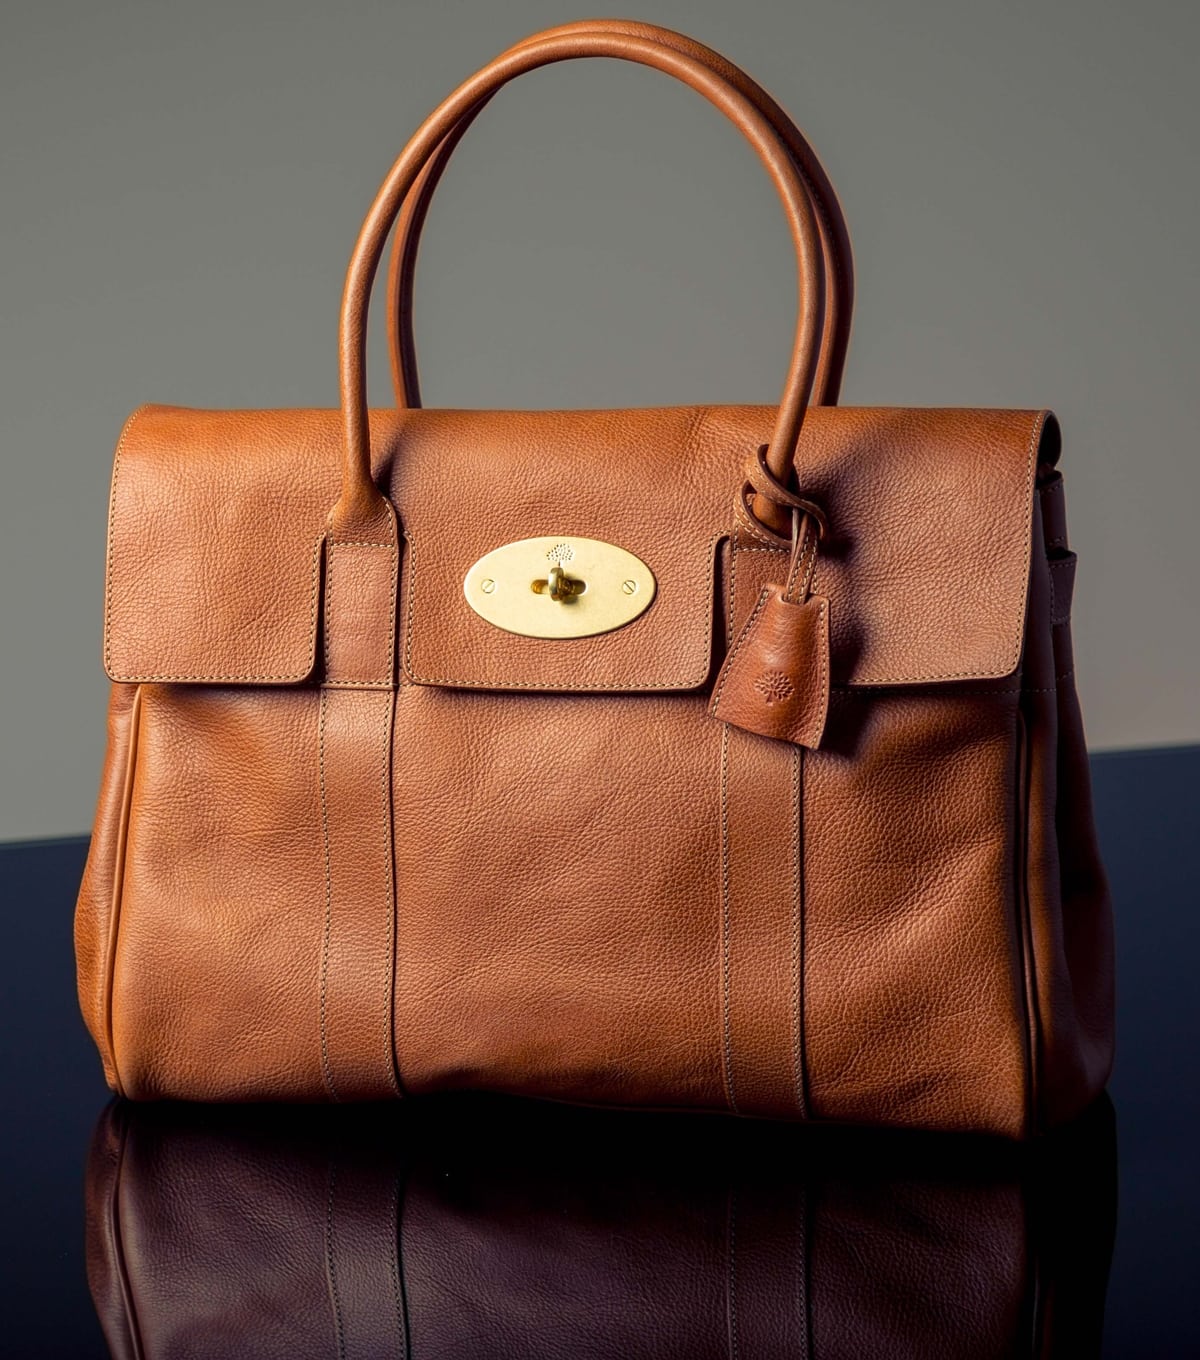 Mulberry bags are renowned for their superior leather quality, characterized by a supple, durable texture, a rich, consistent color, and a refined finish that gracefully ages over time